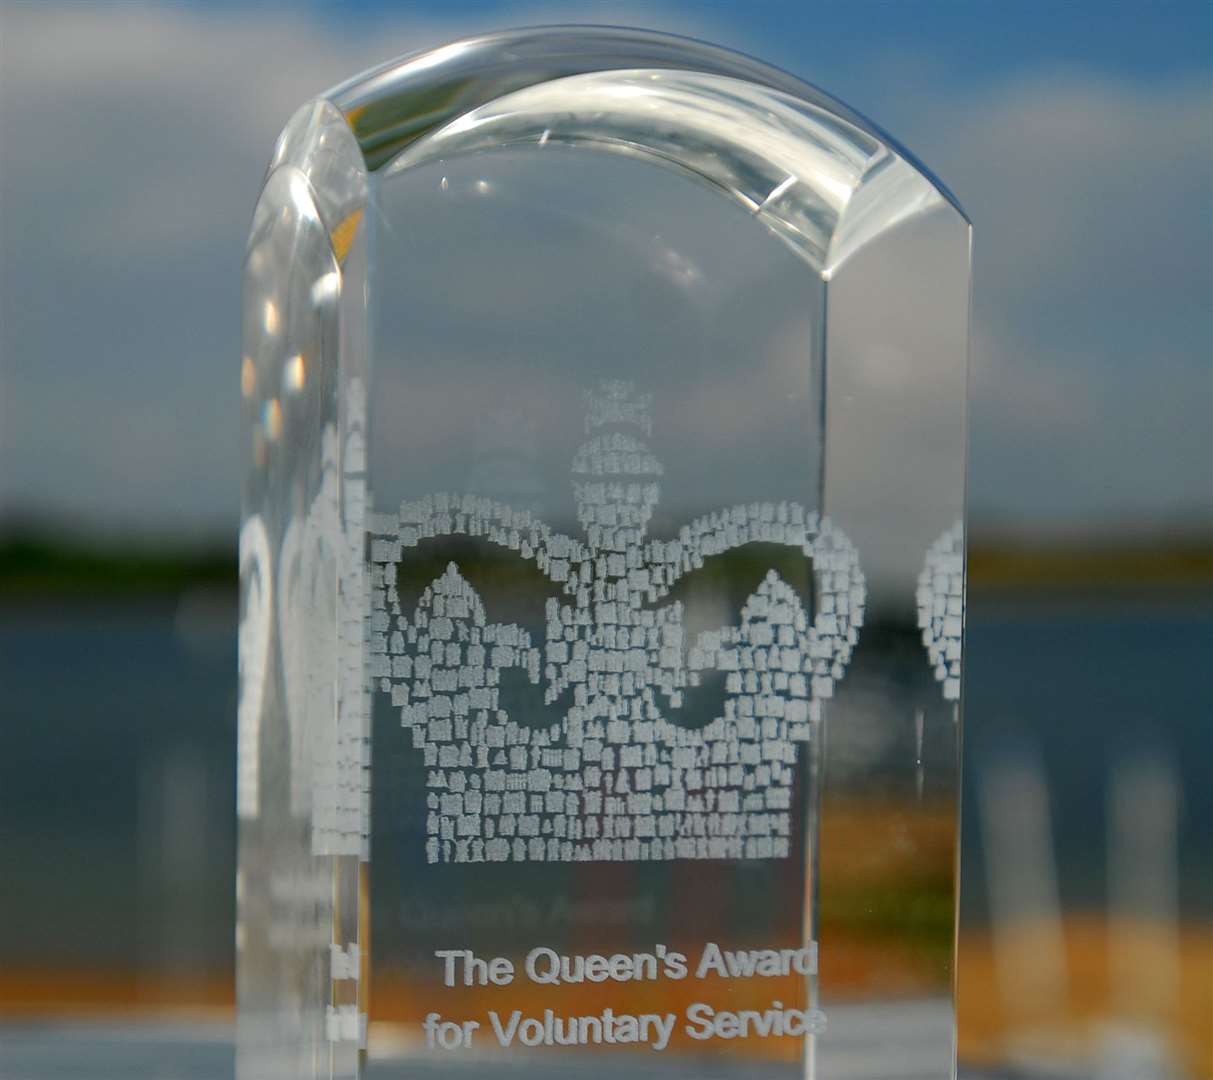 The Queen’s Award for Voluntary Service is the highest award given to volunteer groups across the country for outstanding work done in their local communities for the benefit of others.